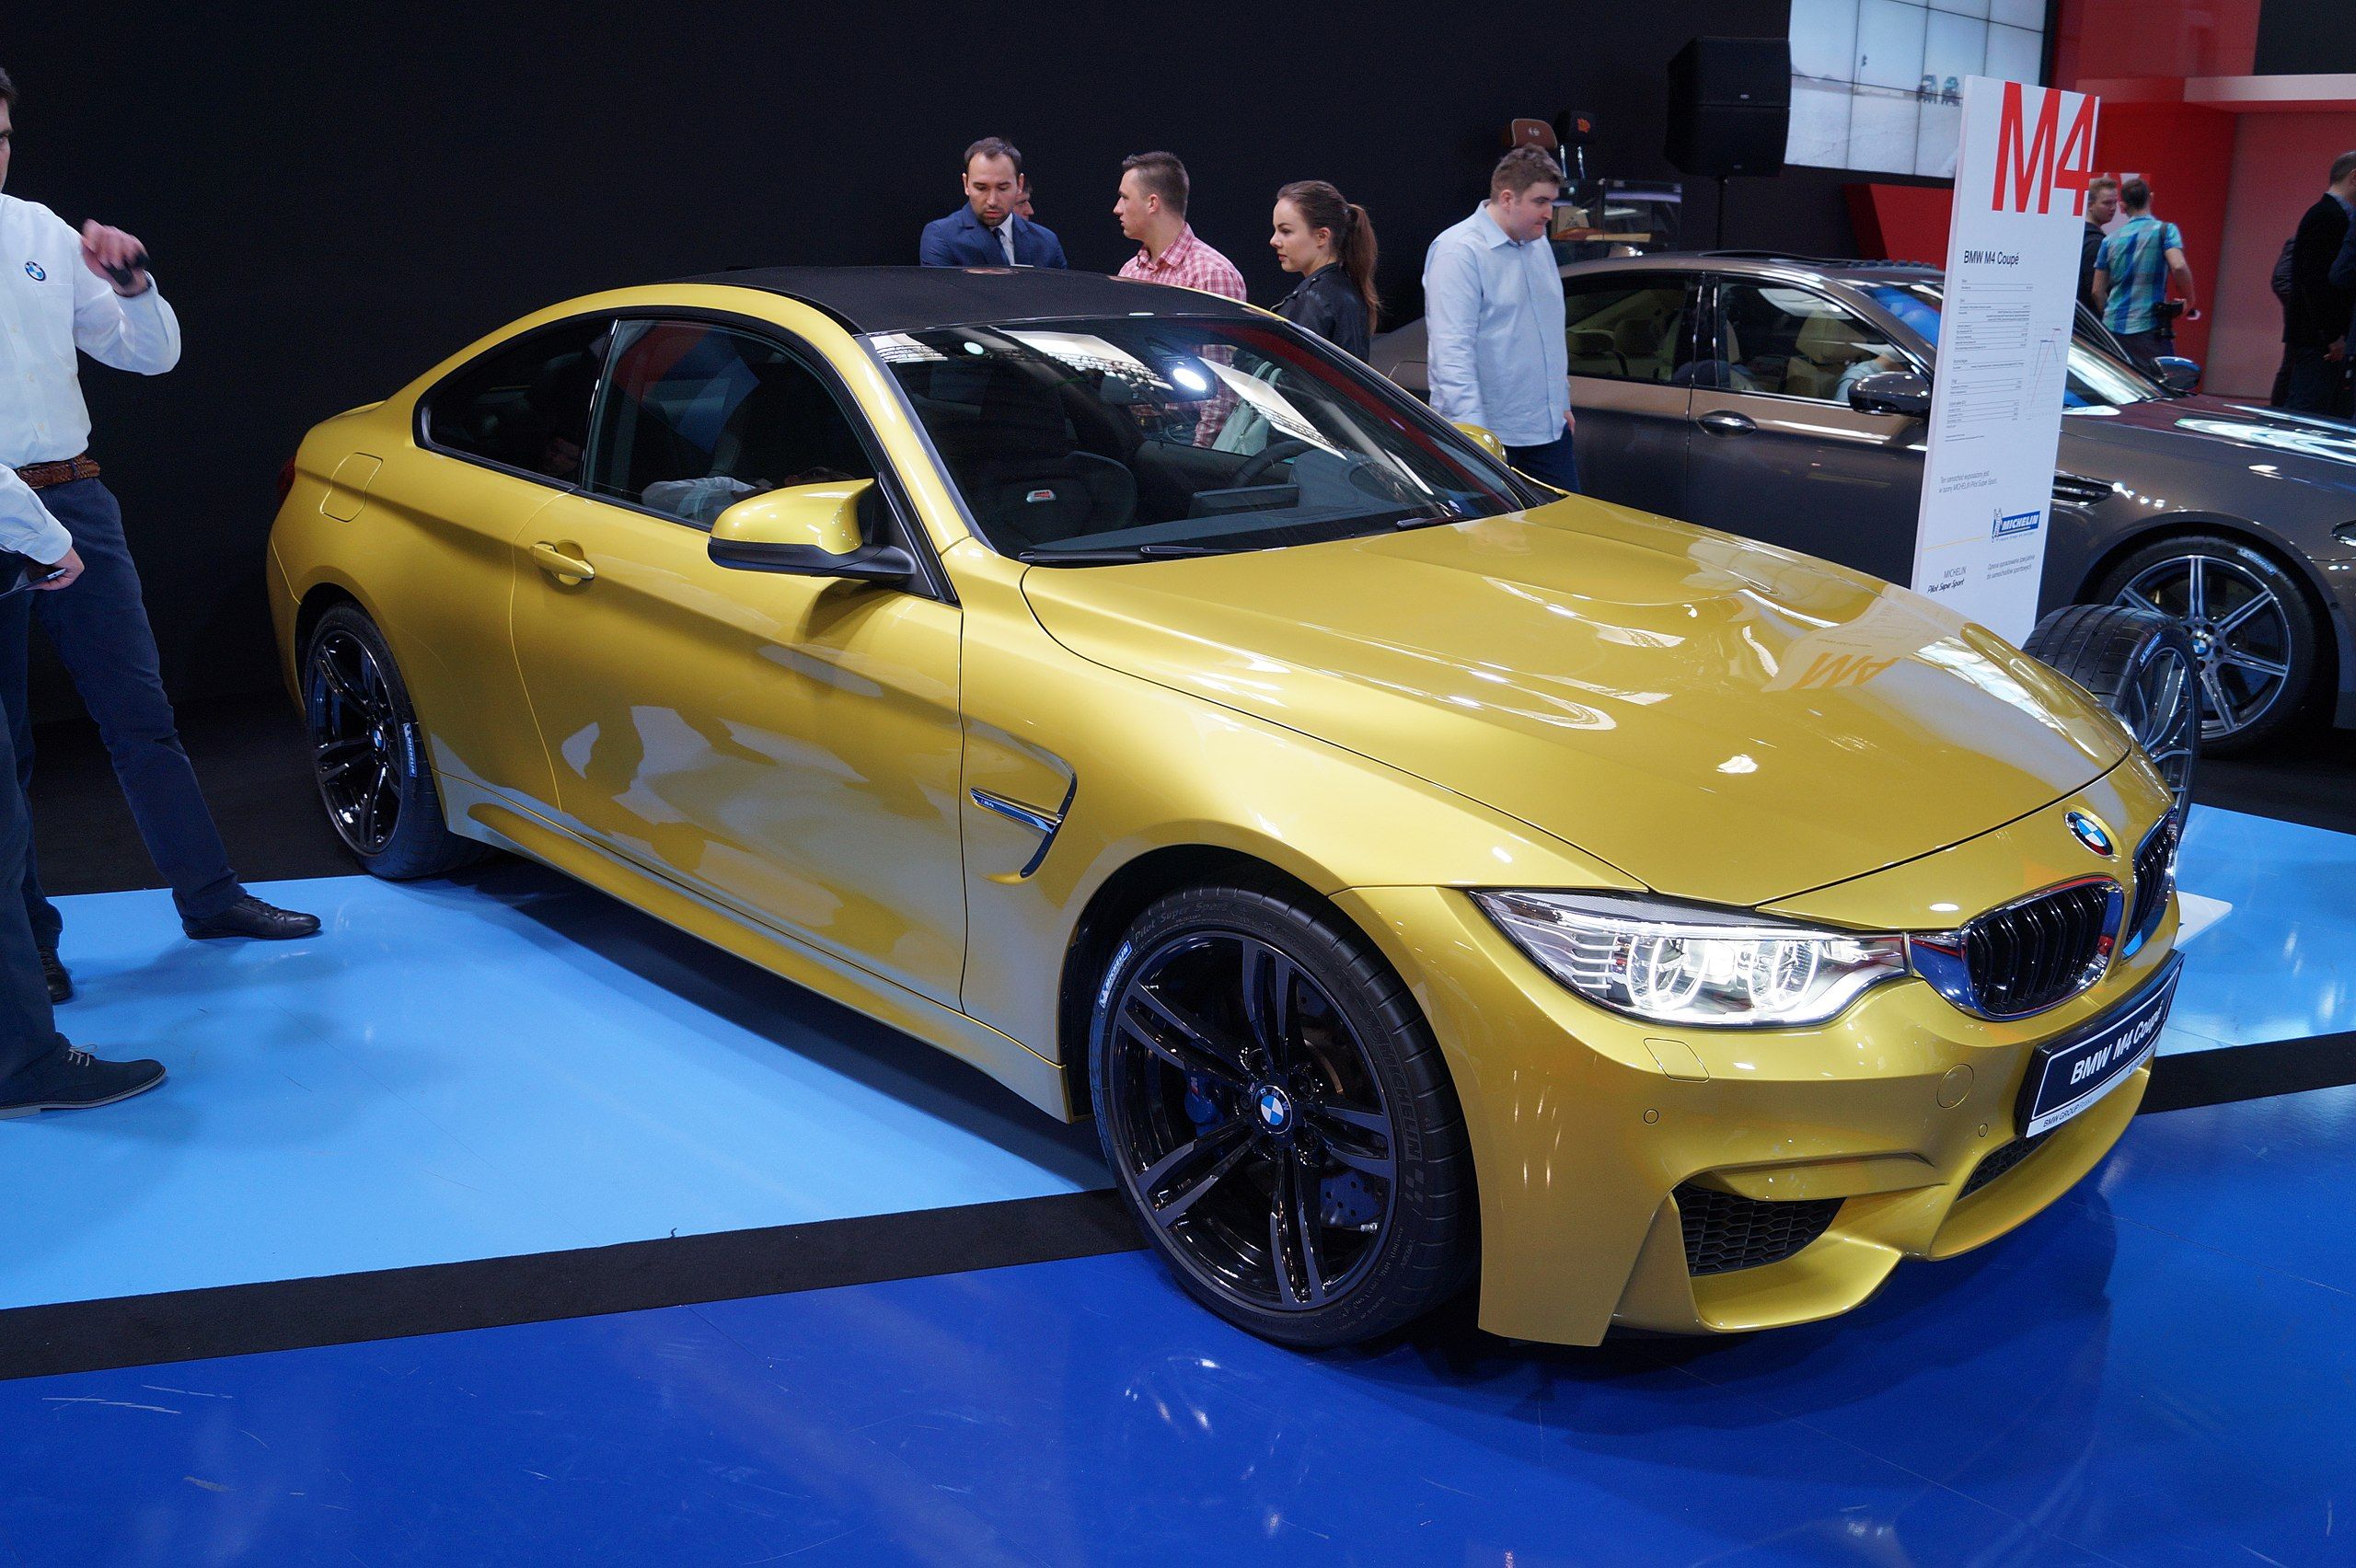 2015 BMW M4 Coupe in Austin Yellow